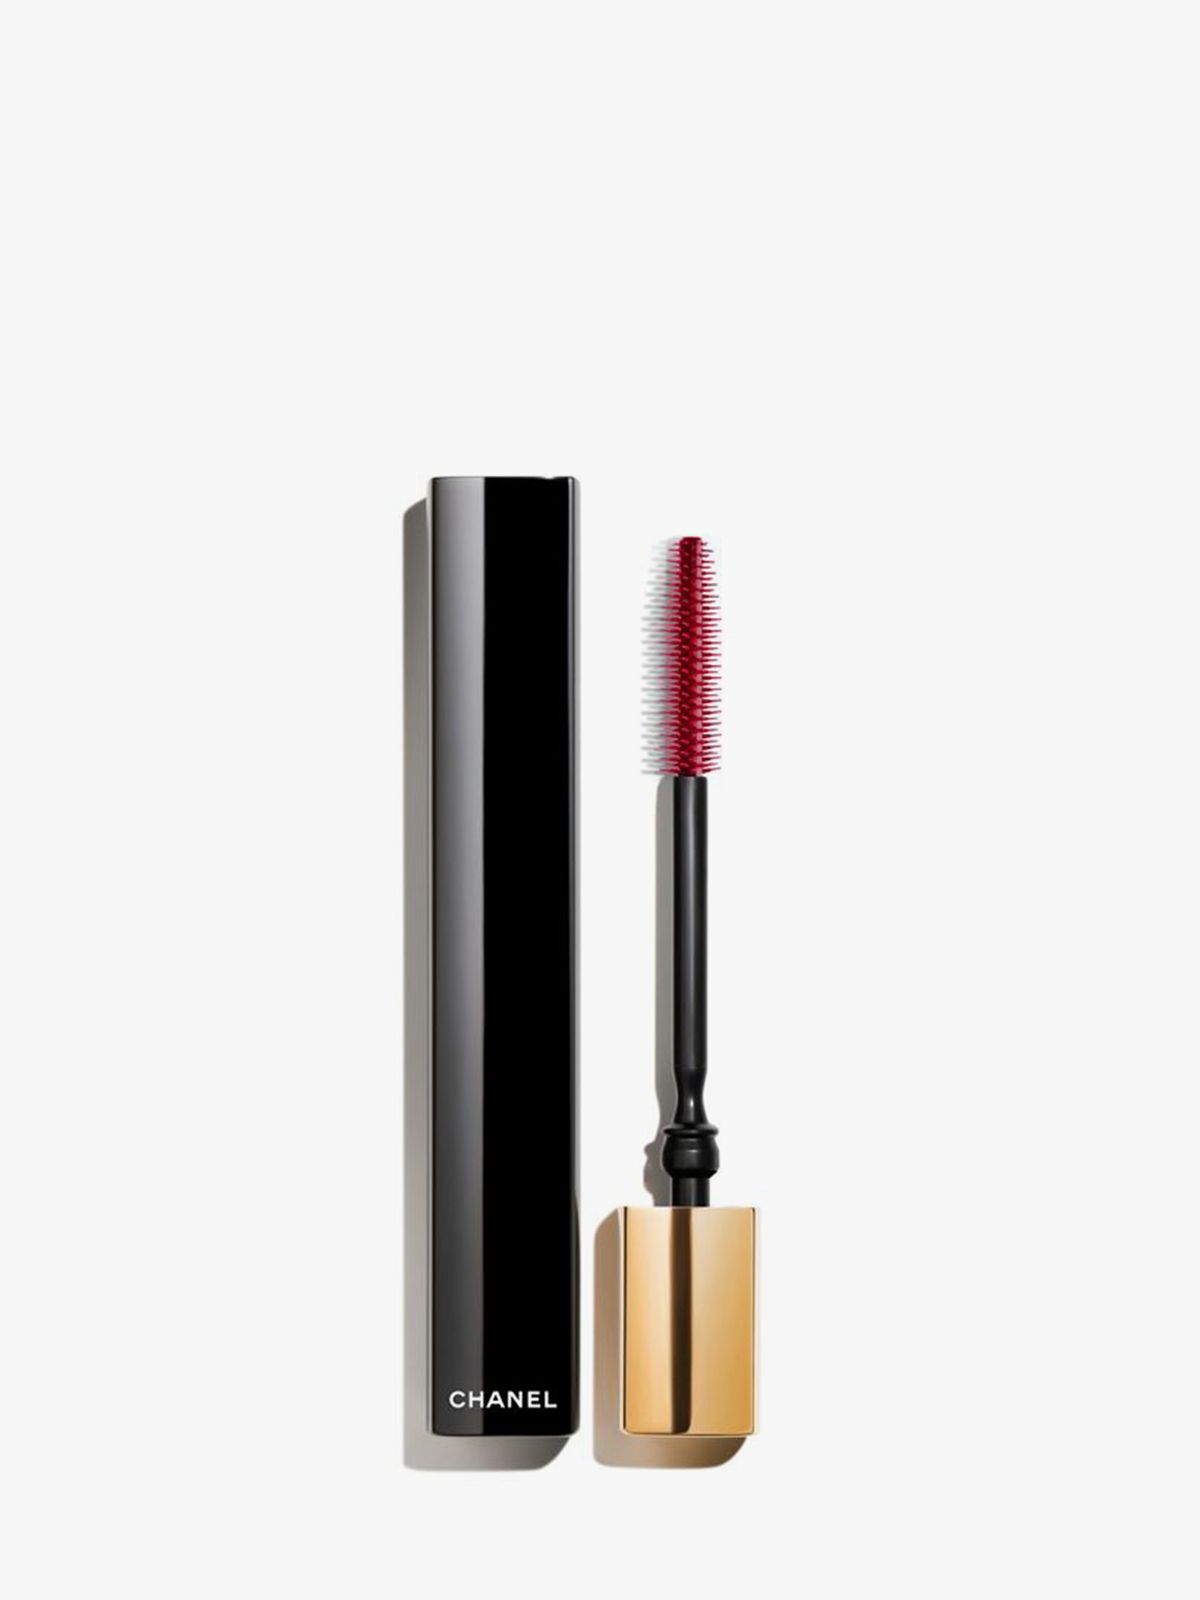 Chanel: Noir Allure All-In-One Mascara: Volume, Length, Curl And Definition, 10 Noir